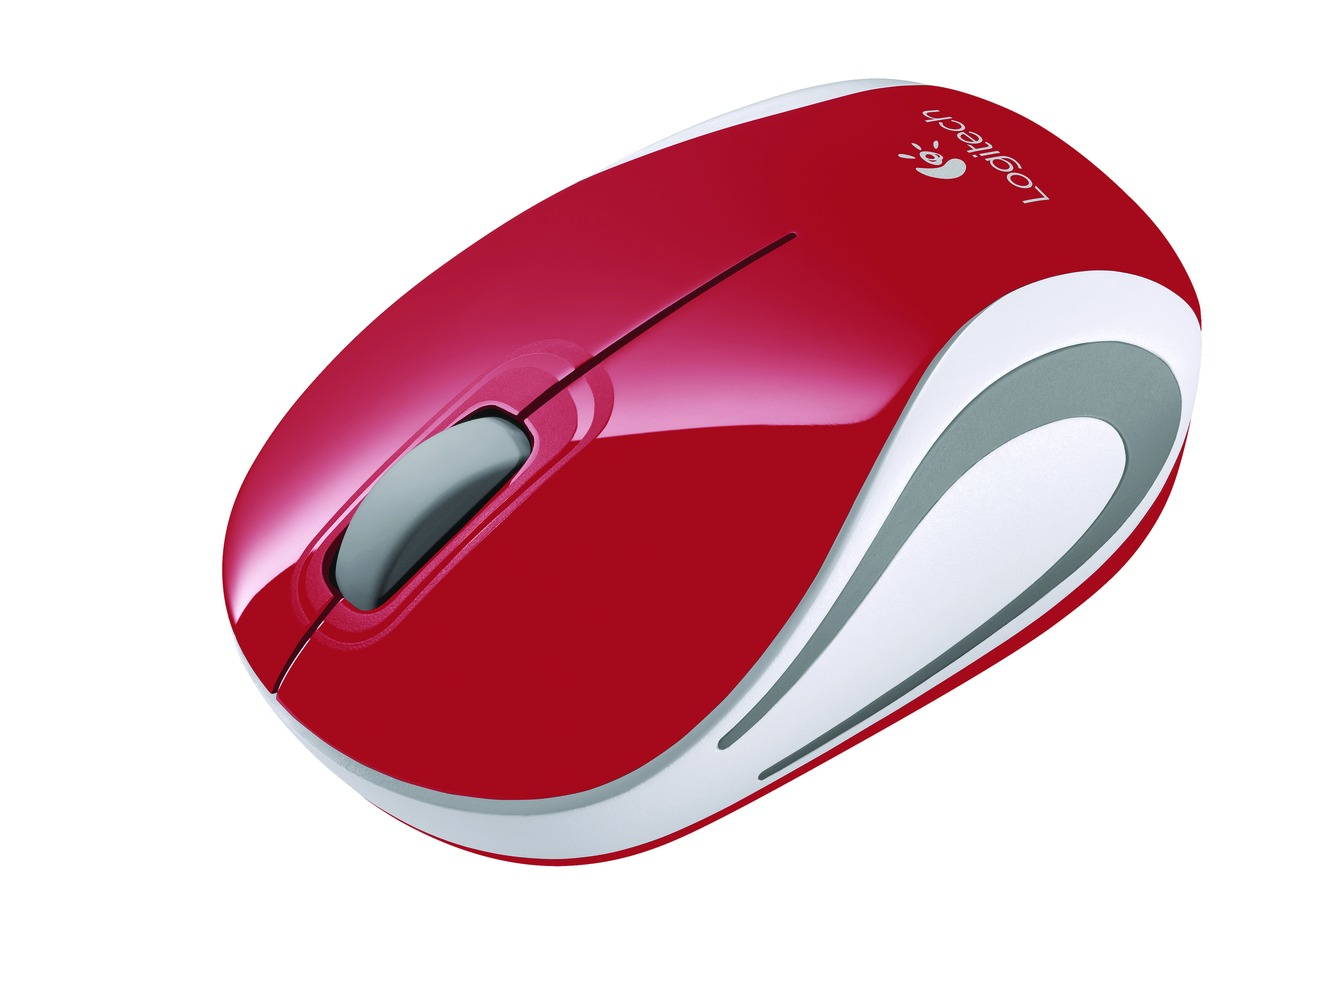 Logitech M187 Wireless Mini Mouse - Red - image 3 of 4